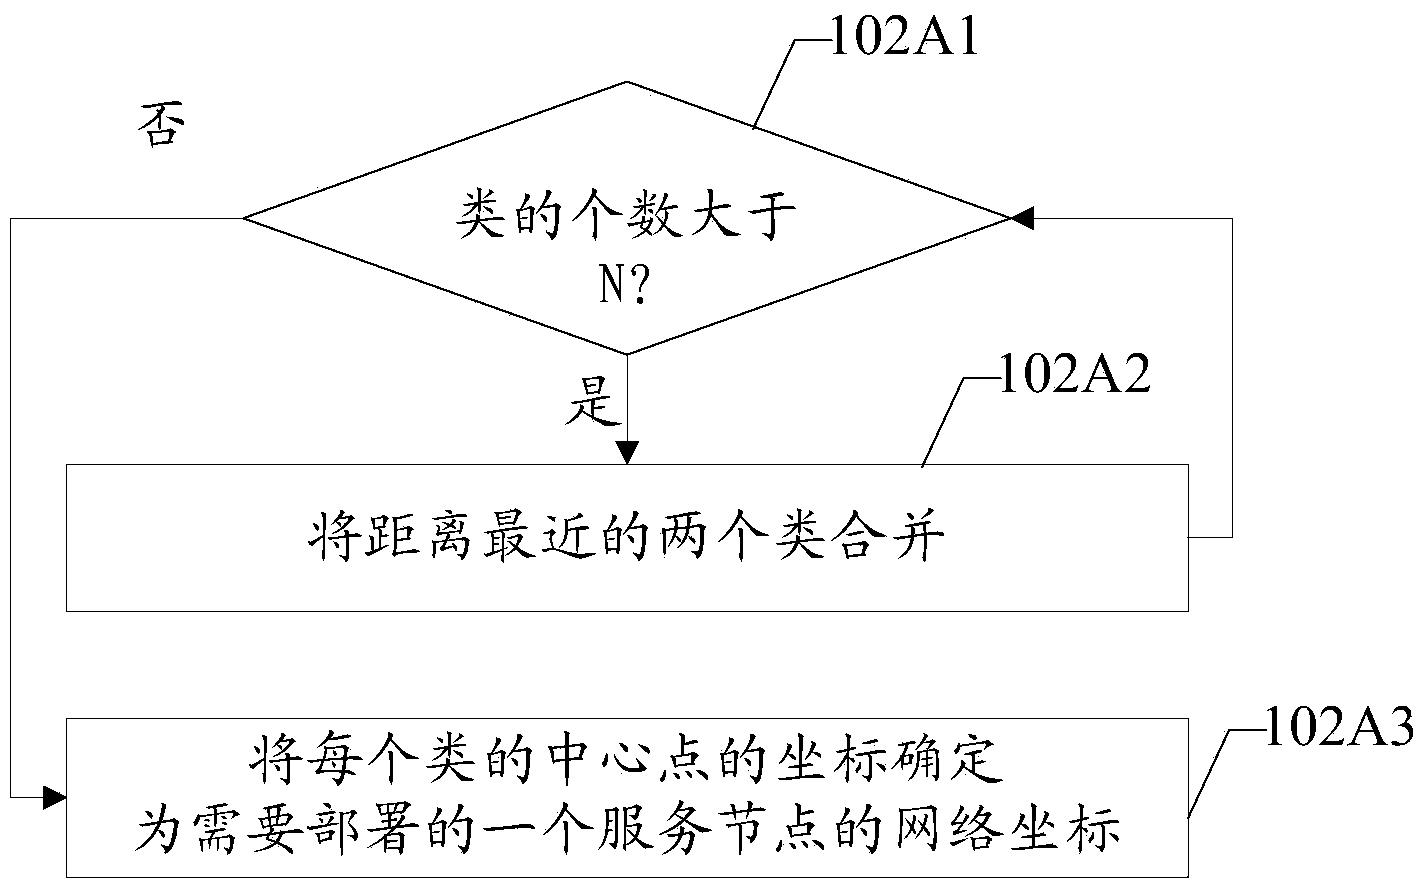 Method and system for determining deployment scheme of service nodes